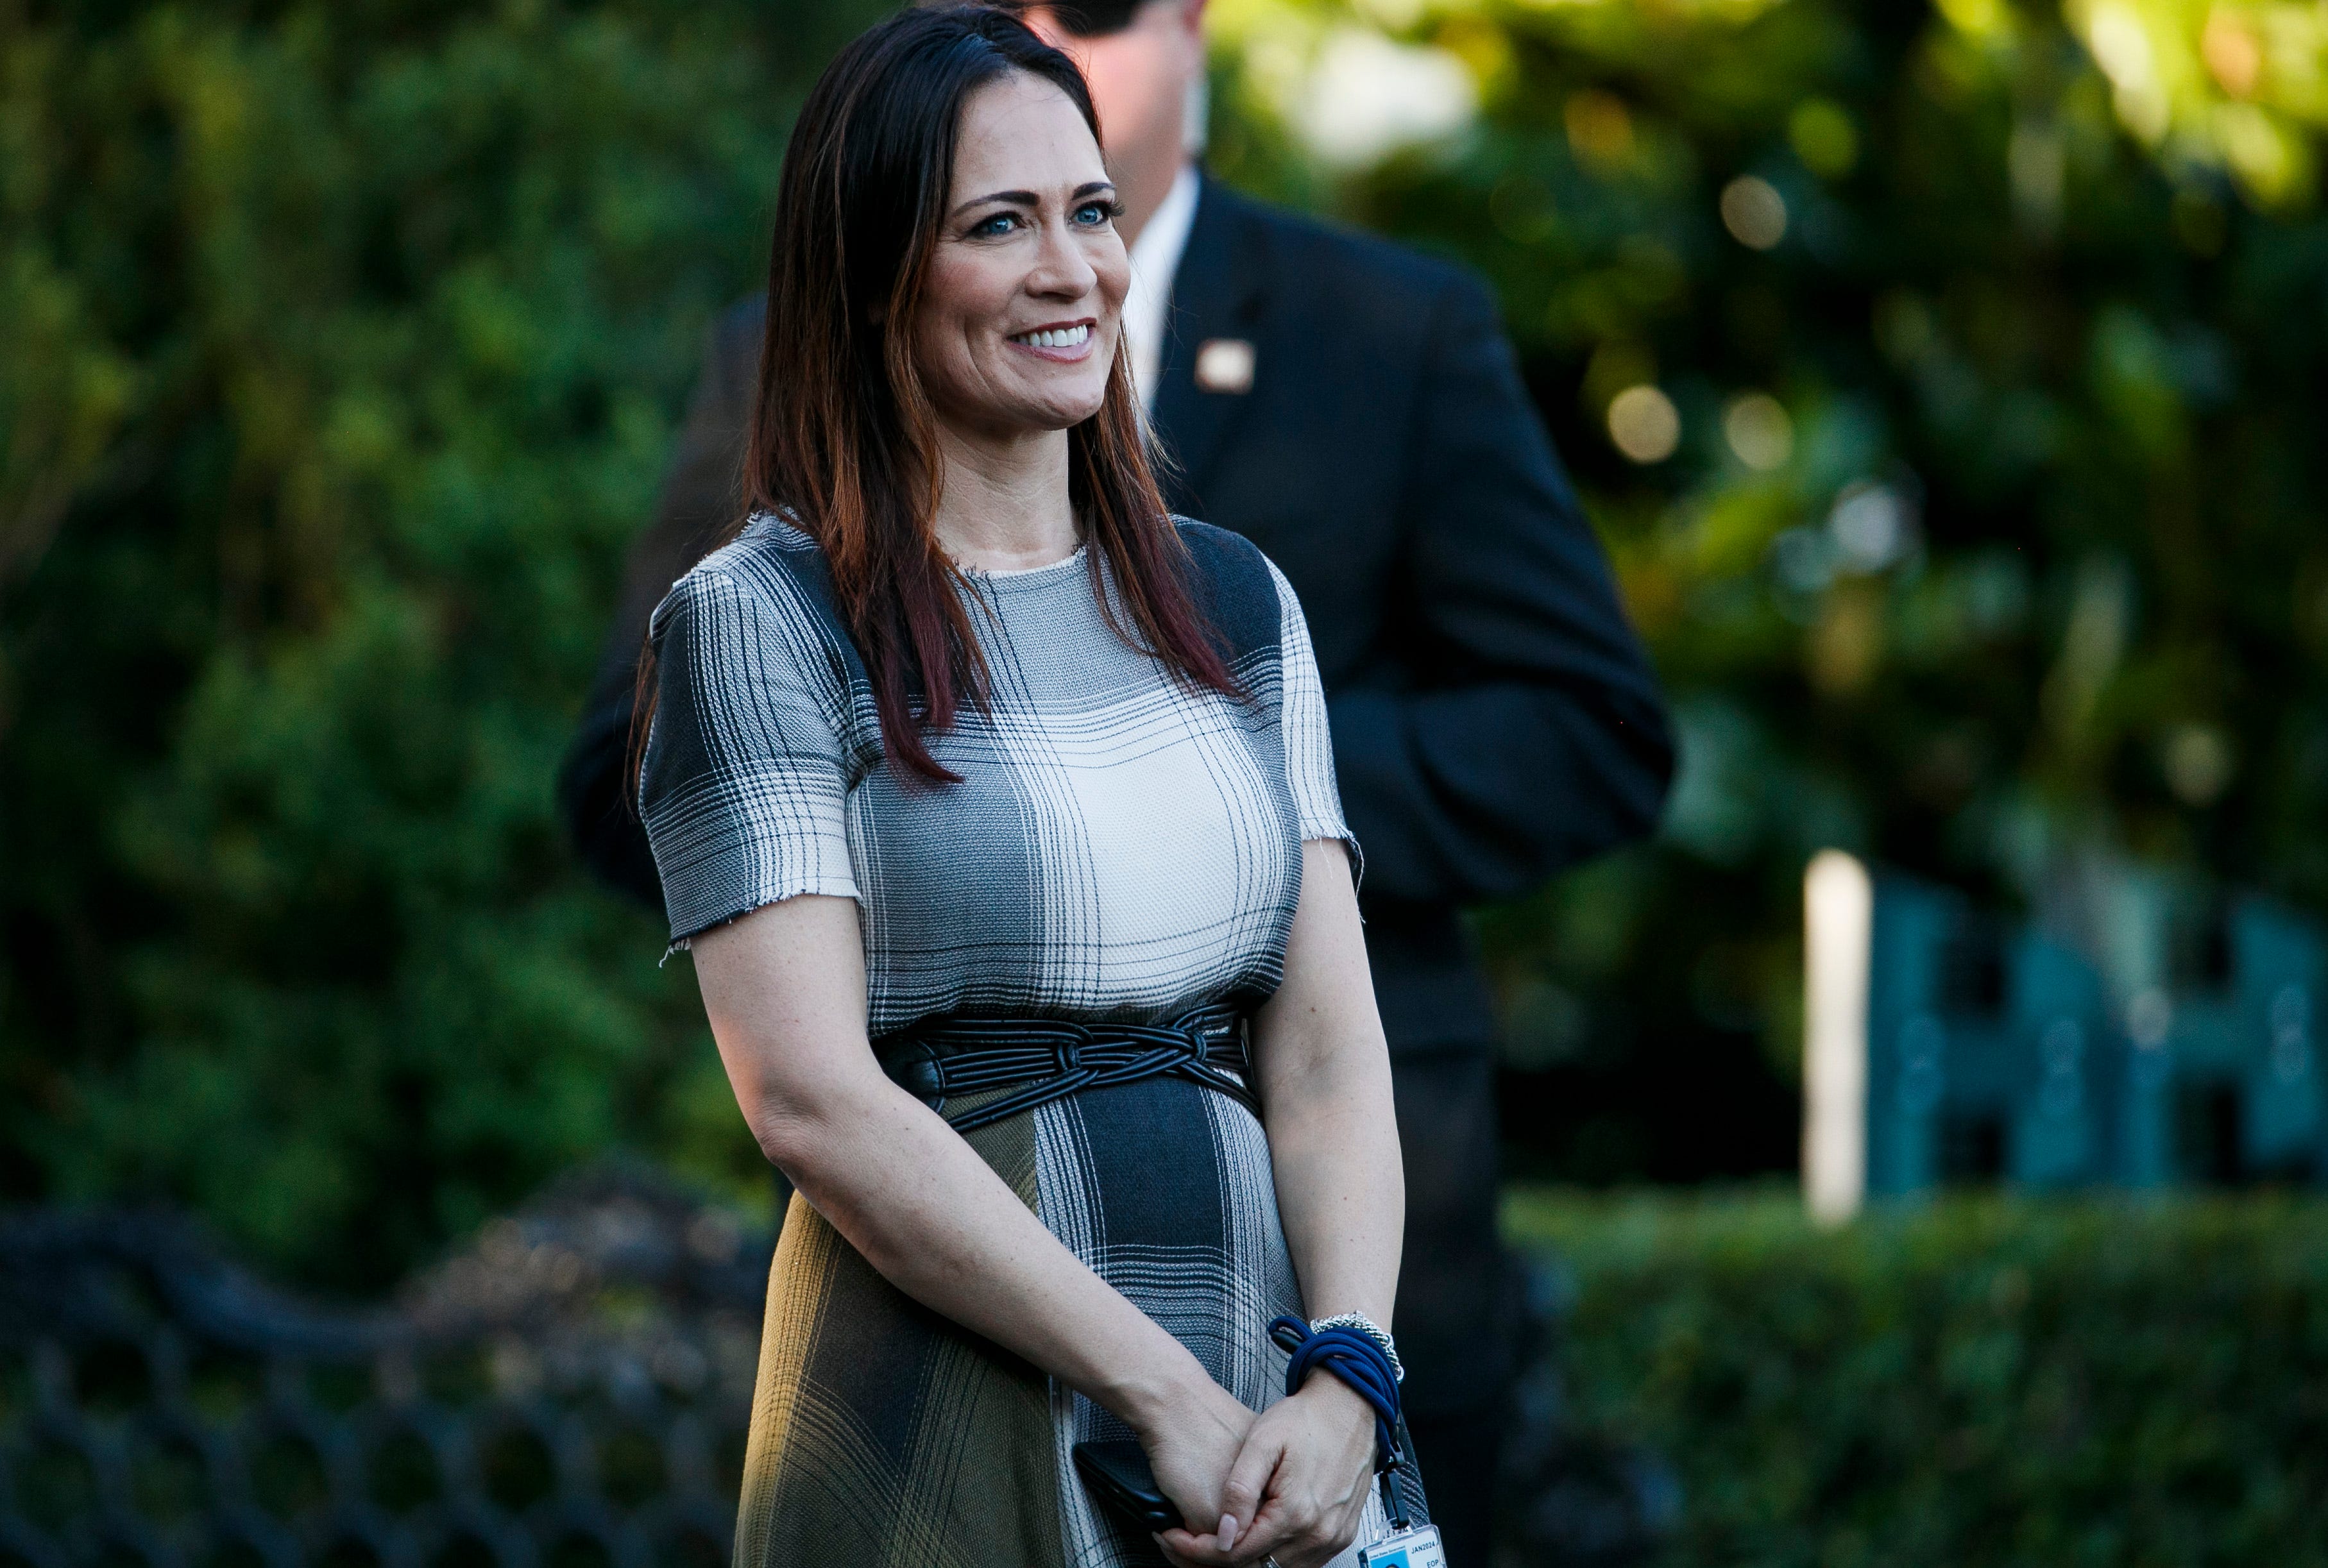 Stephanie Grisham, spokeswoman for first lady Melania Trump, attends the annual Congressional Picnic on the South Lawn, Friday, June 21, 2019, in Washington. Melania Trump has announced that Grisham will be the new White House press secretary on Tuesday, June 25, 2019.